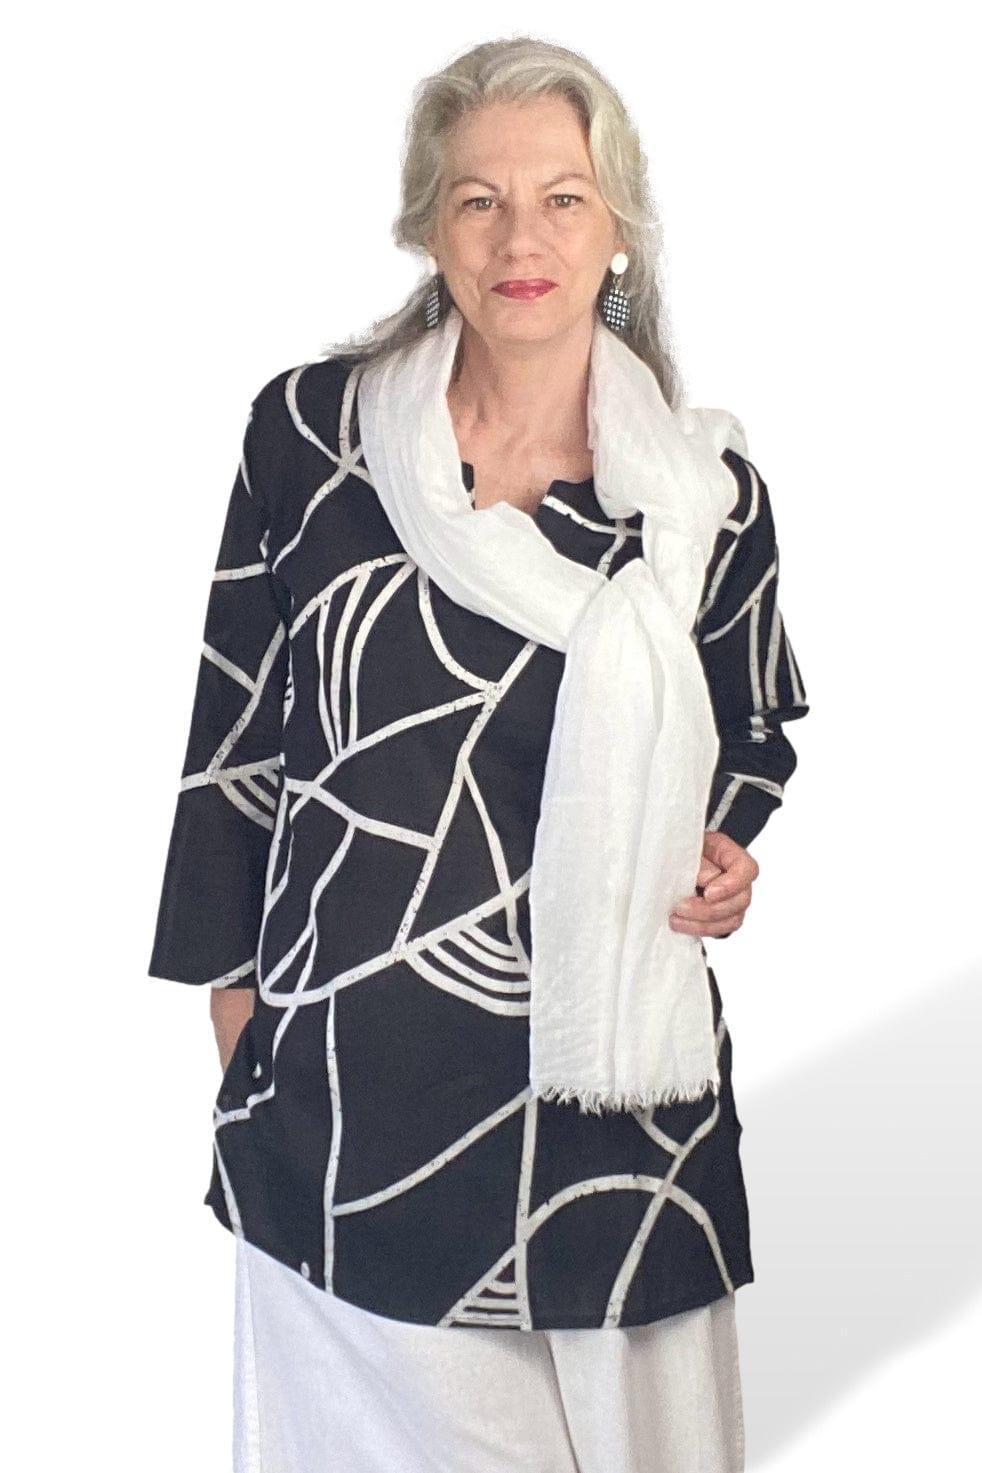 Woman wearing black and white tunic with white pants and scarf with coordination check earrings.